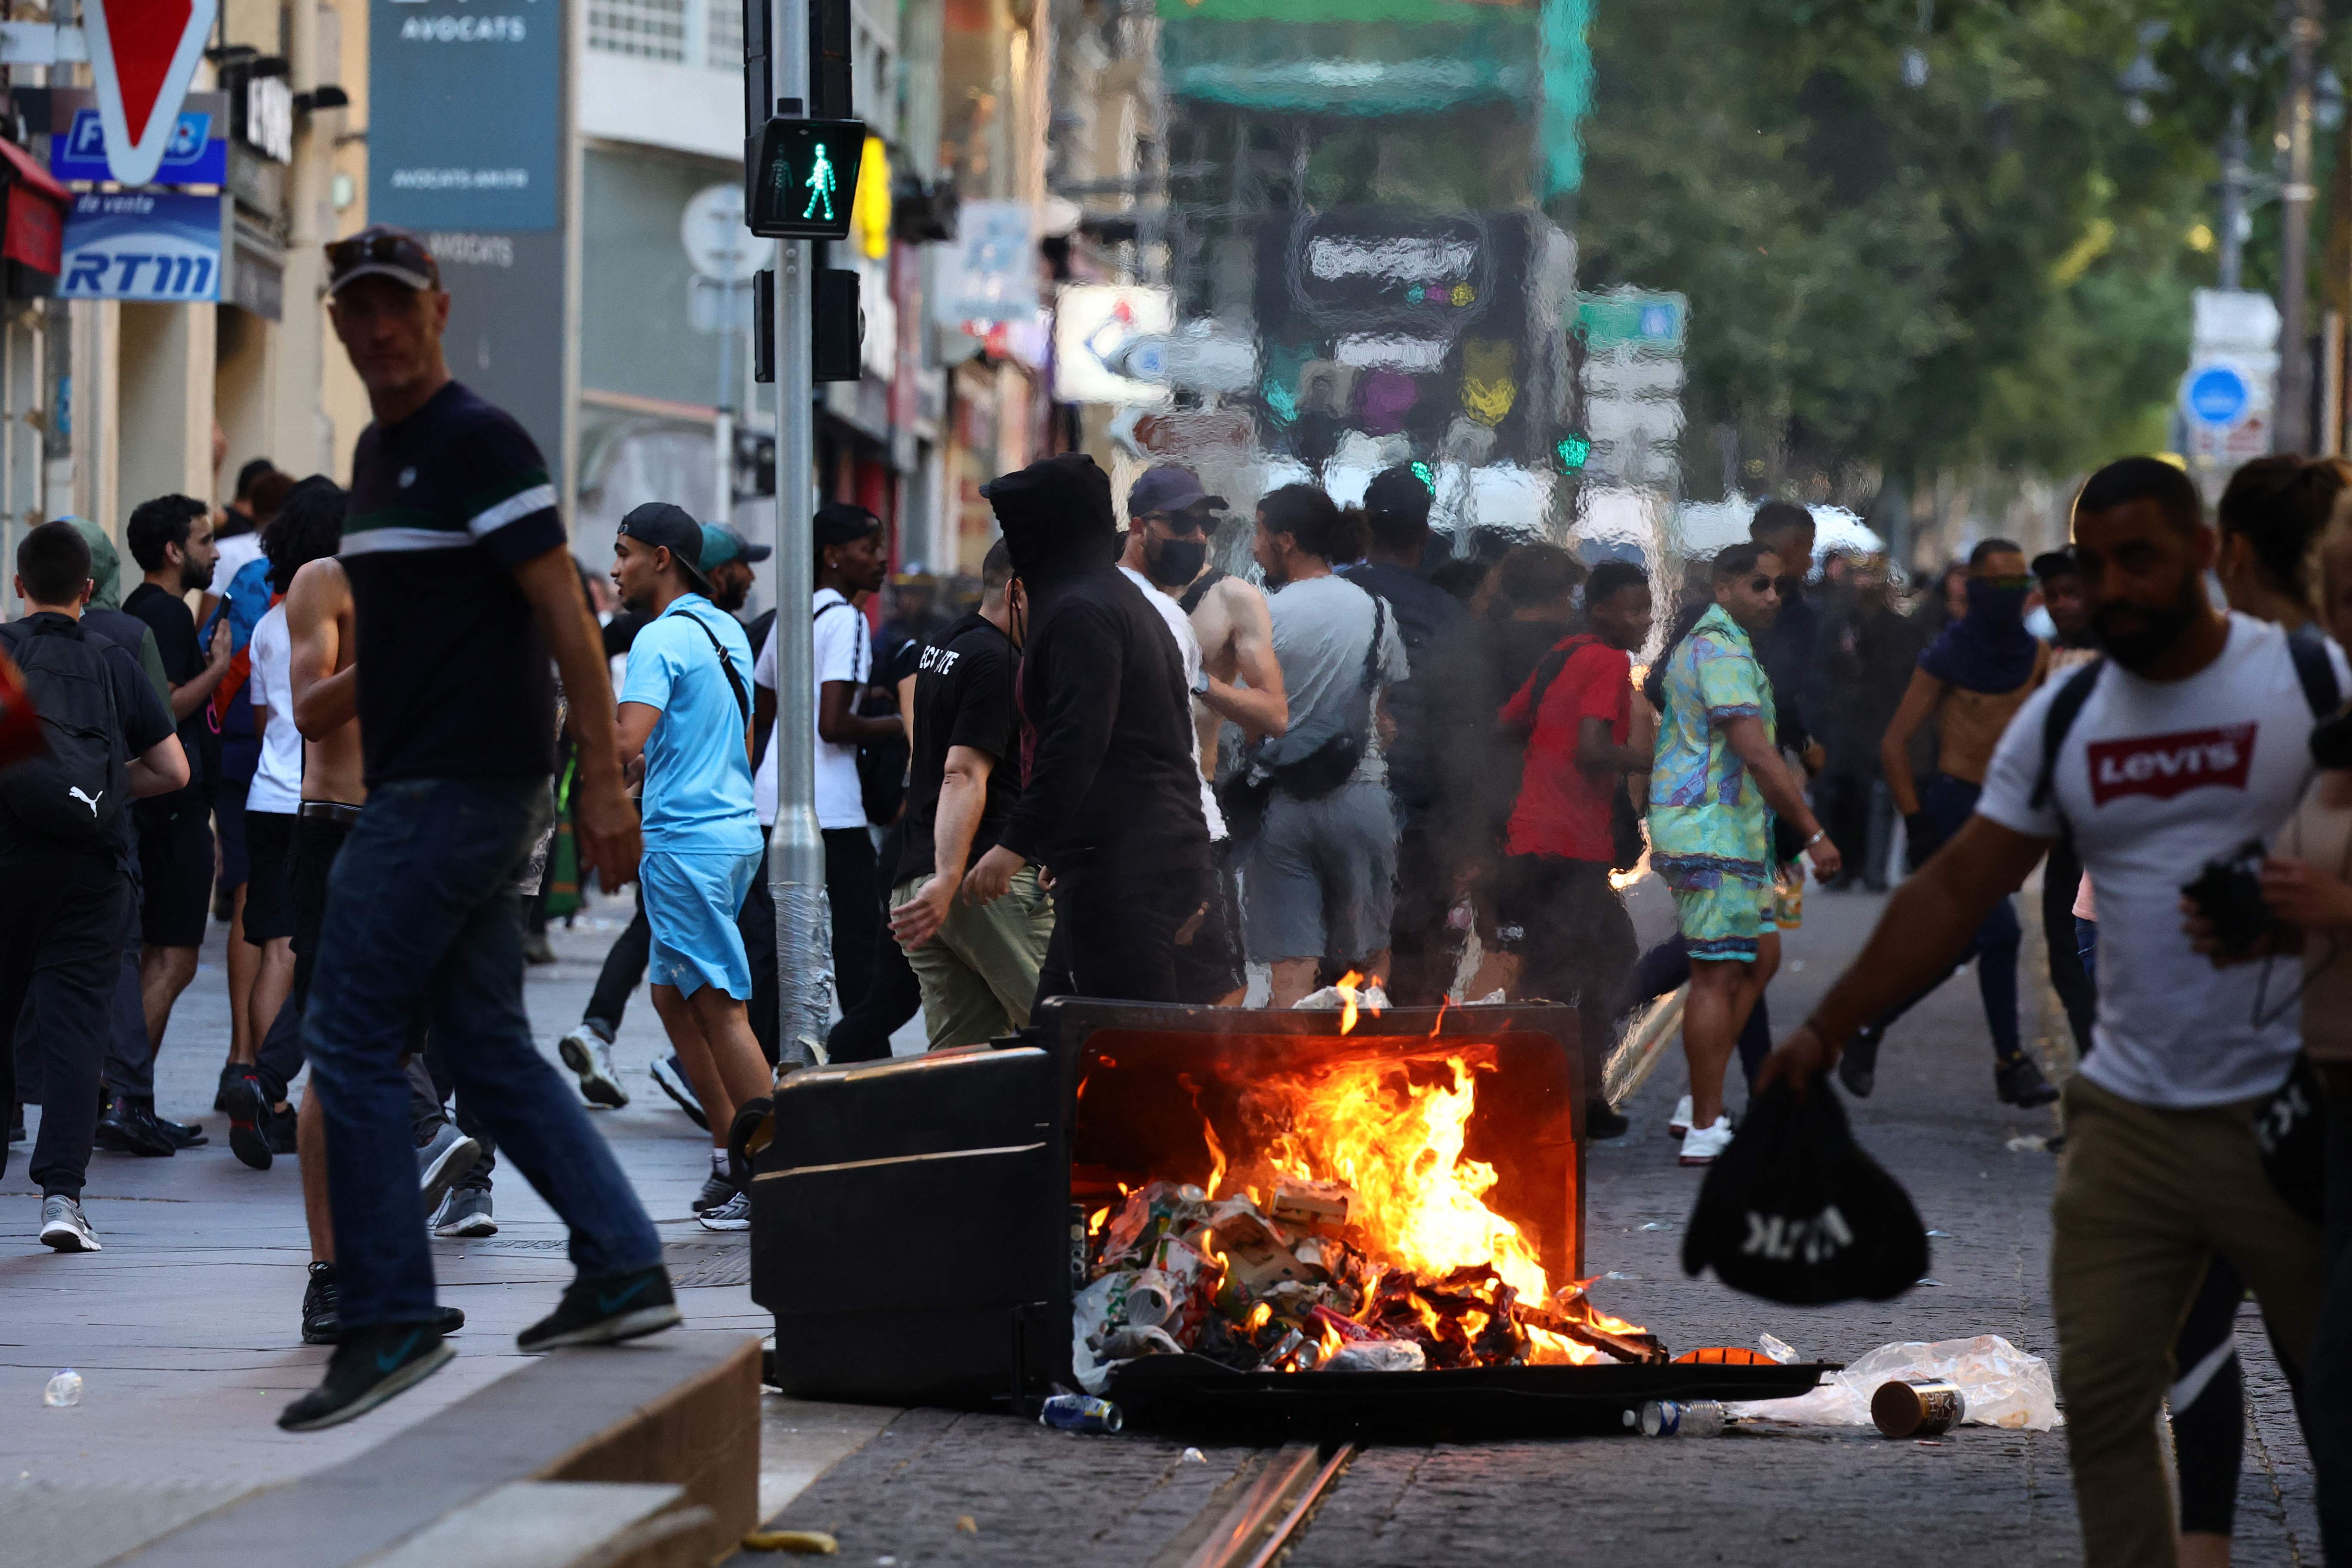 Protesters walk past a burnt out trash bin during clashes with police in Marseille